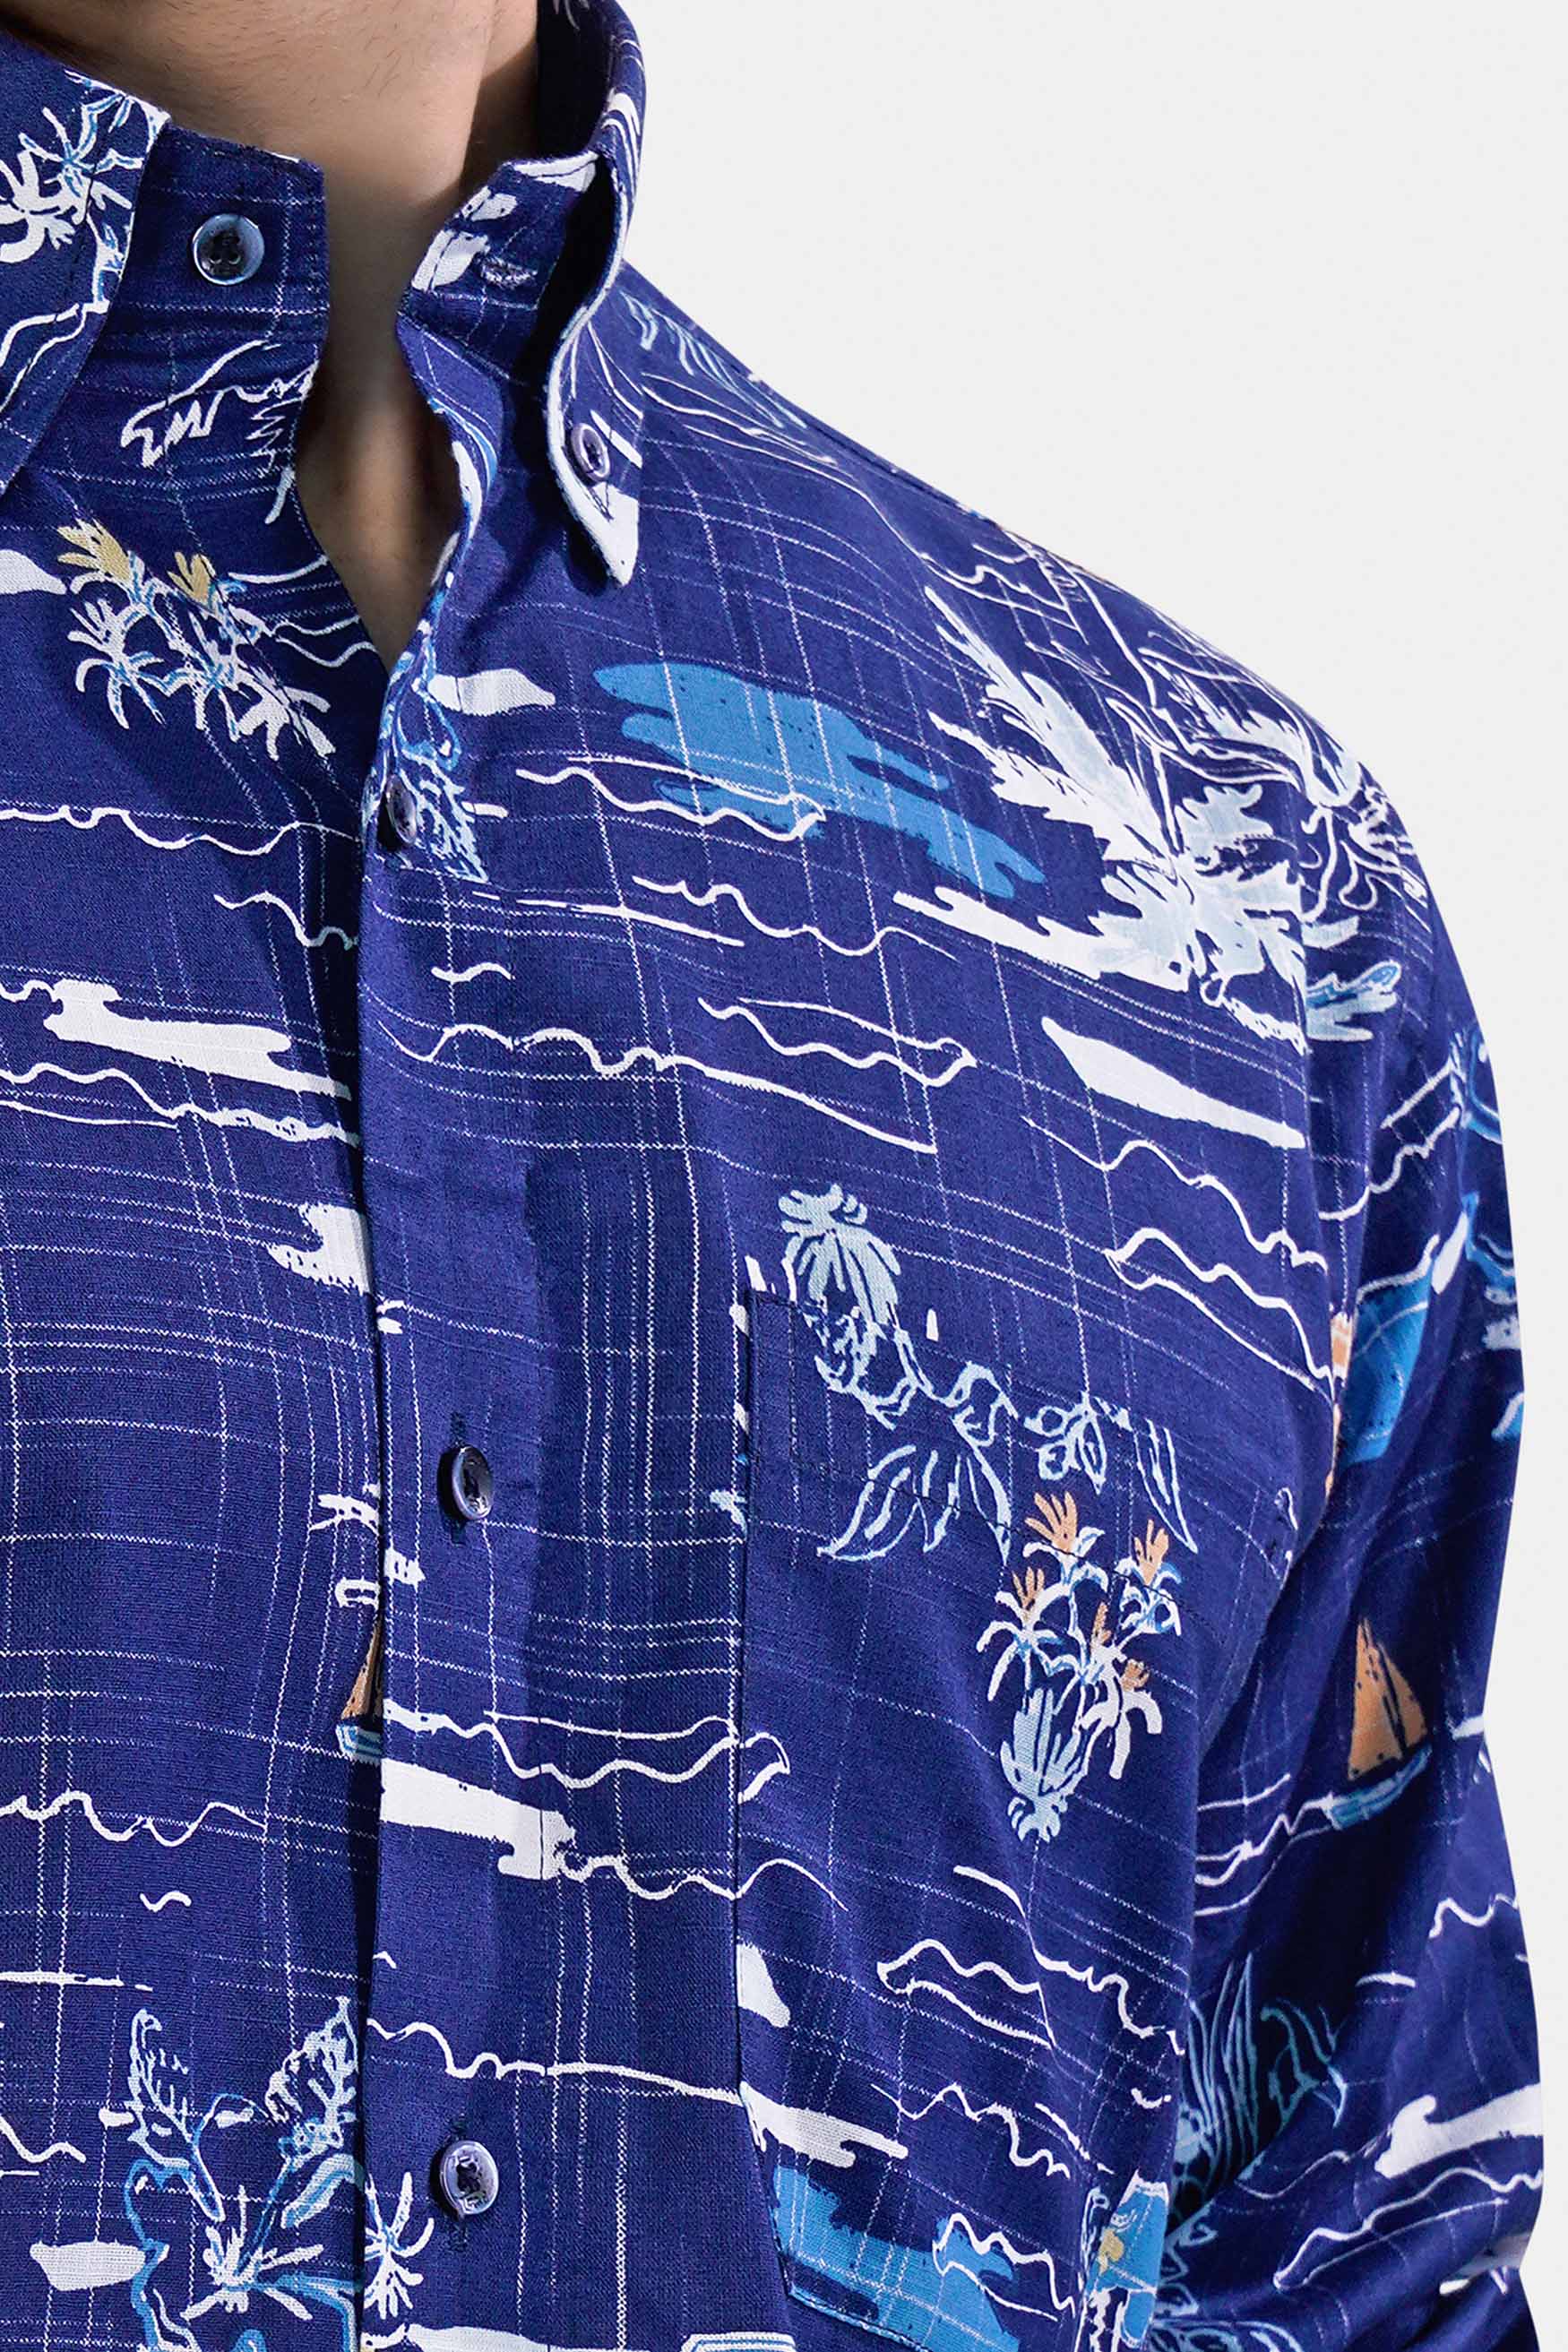 Lapis Blue and White Multicolour Printed Chambray Shirt